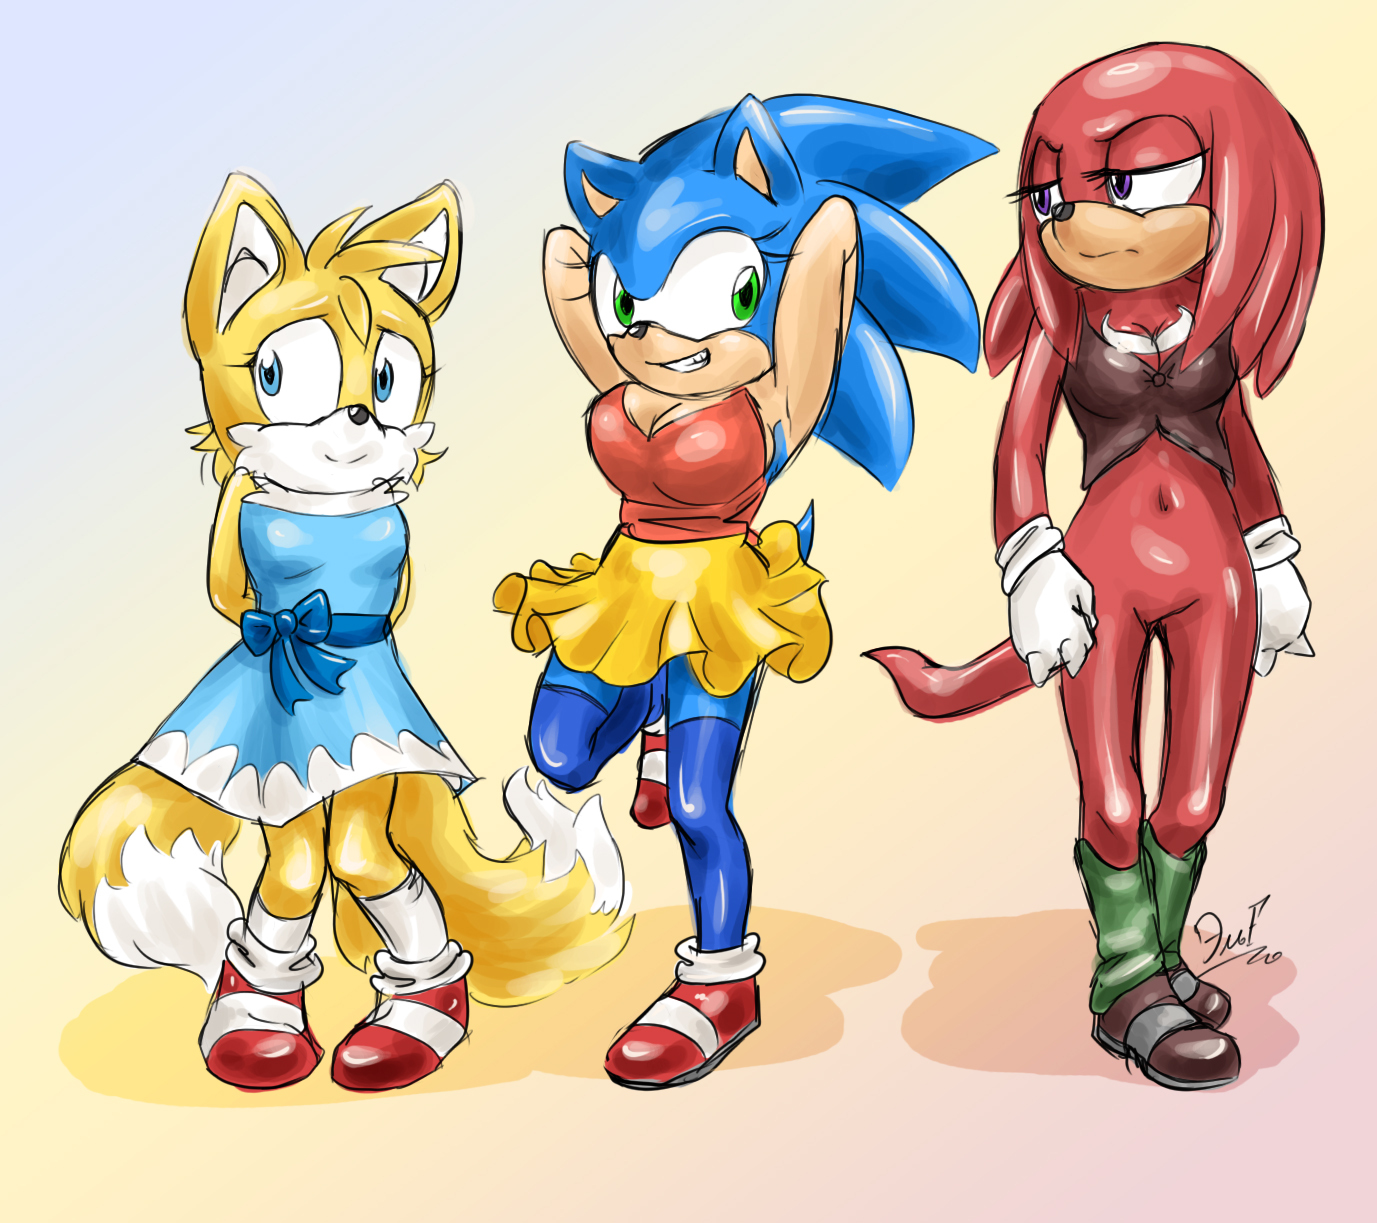 8229 Safe Artistkrazyelf Knuckles The Echidna Miles Tails Prower Sonic The Hedgehog